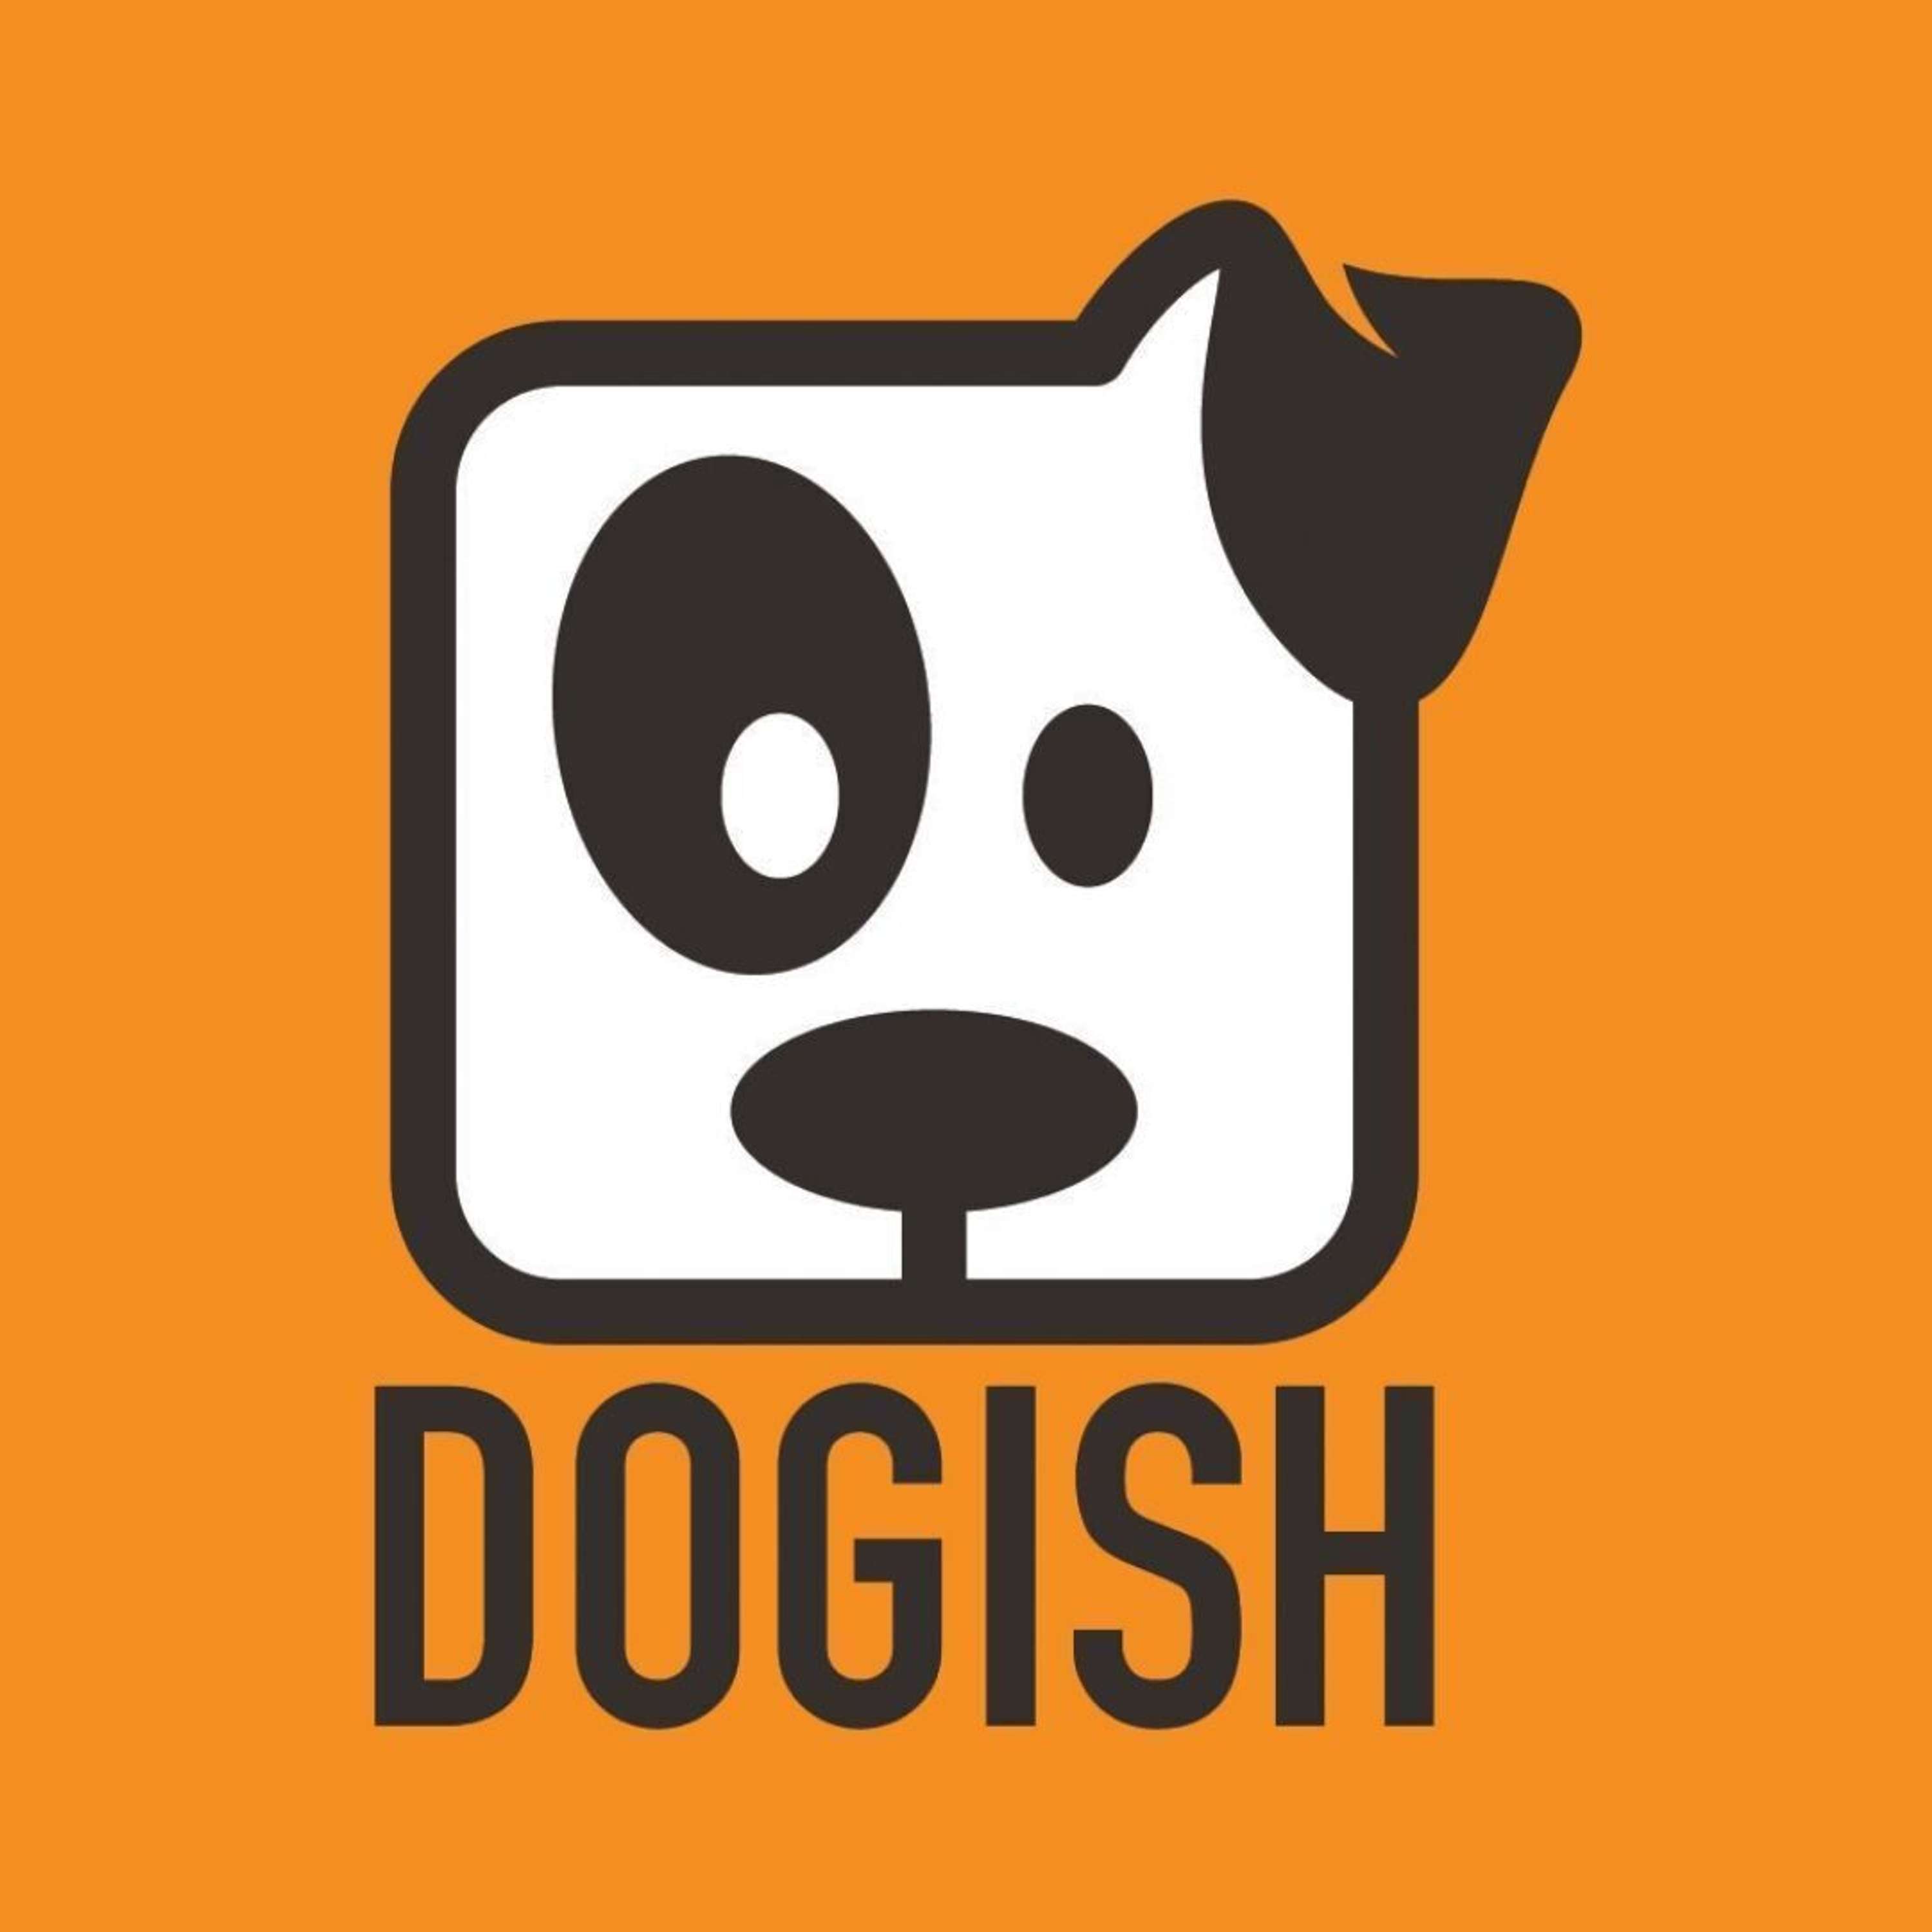 Dogish Podcast - Dogish Turns Six Months Old PLUS Huge Announcement! 07/20/21